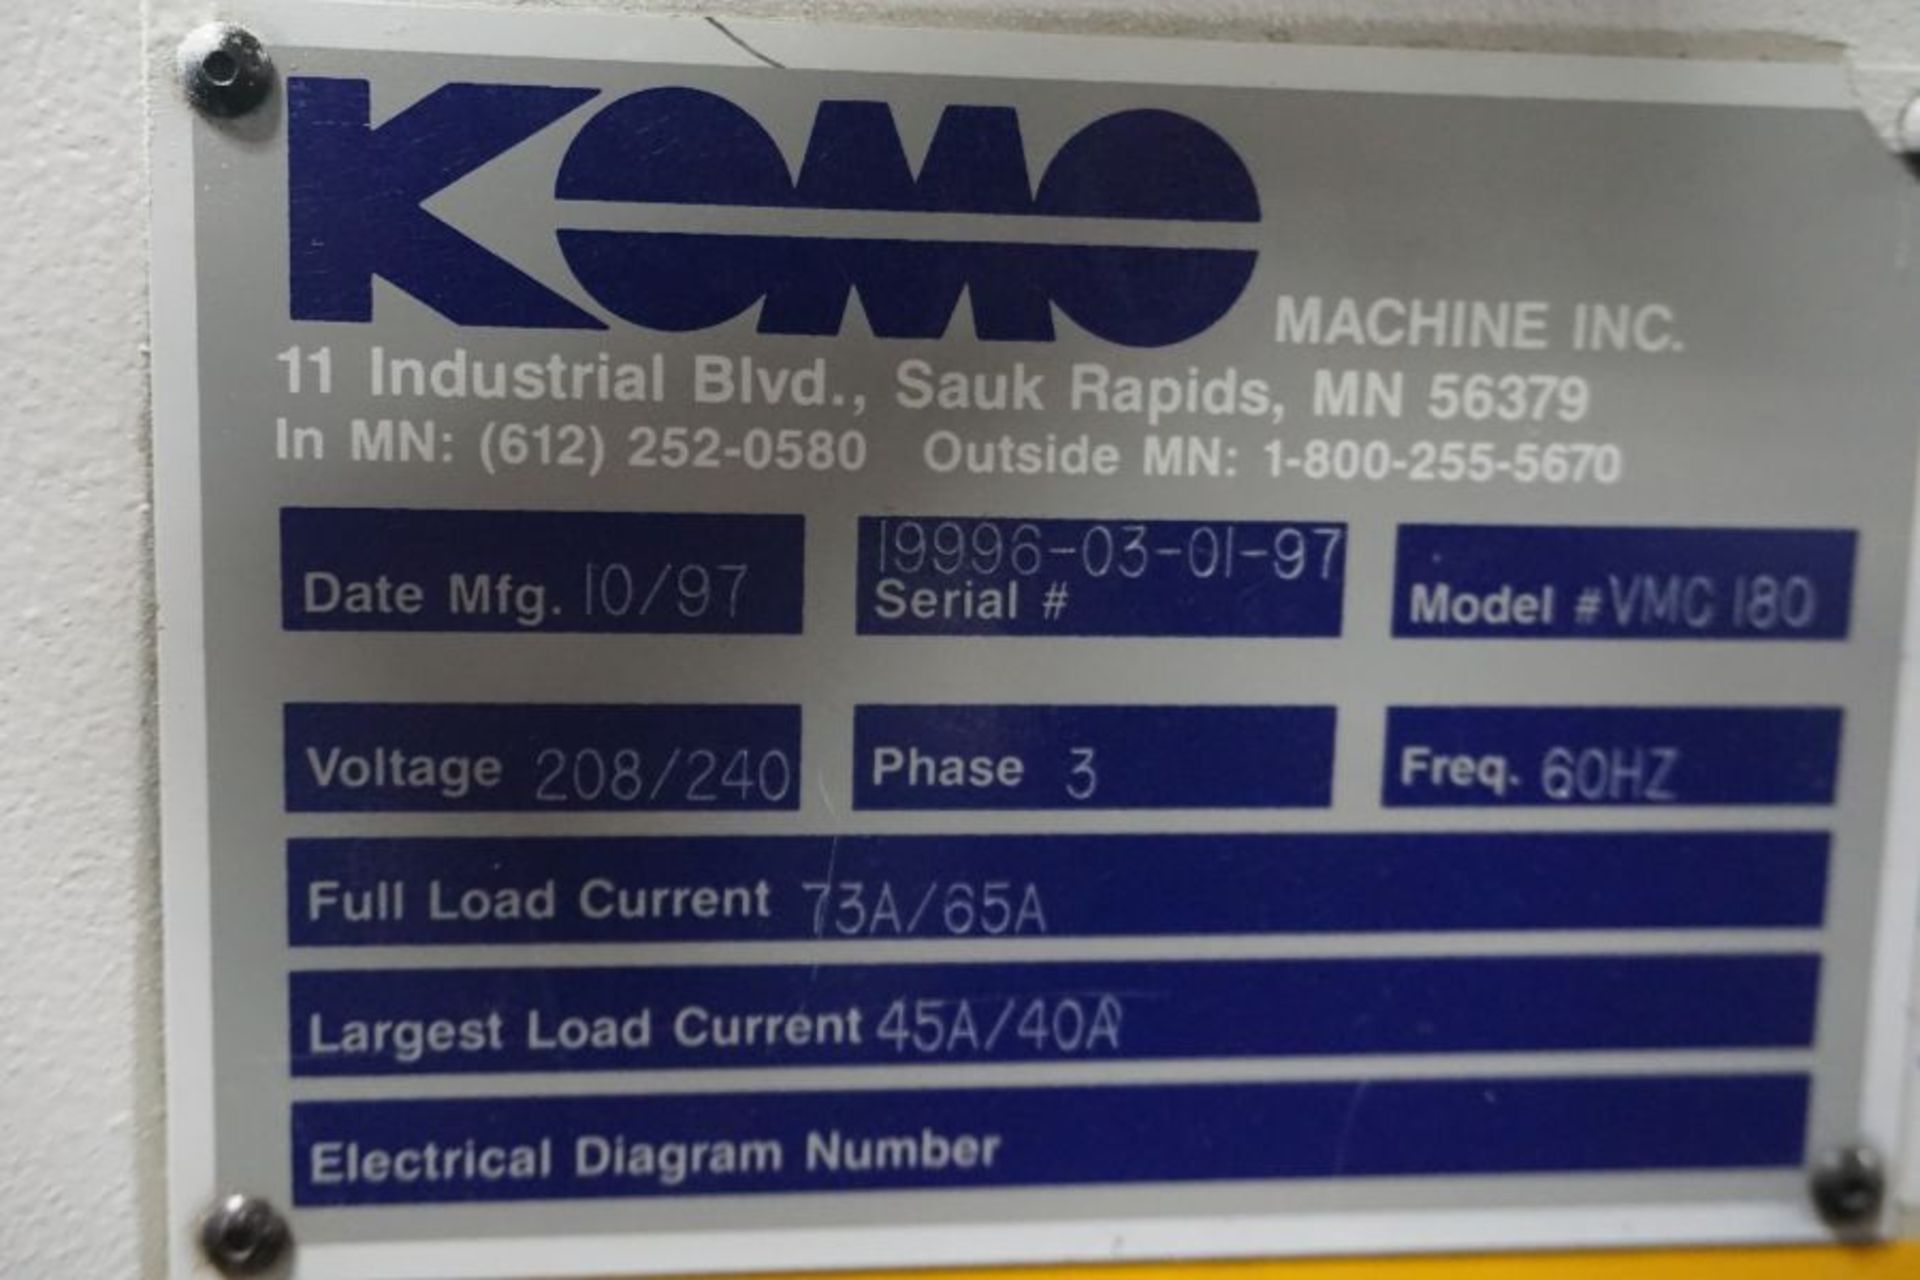 Komo VMC-180, Fanuc 16M, 180" x 24" x 22" travels, 10k RPM, CT40, 30 ATC, s/n 9996-03-01-97, New - Image 8 of 8